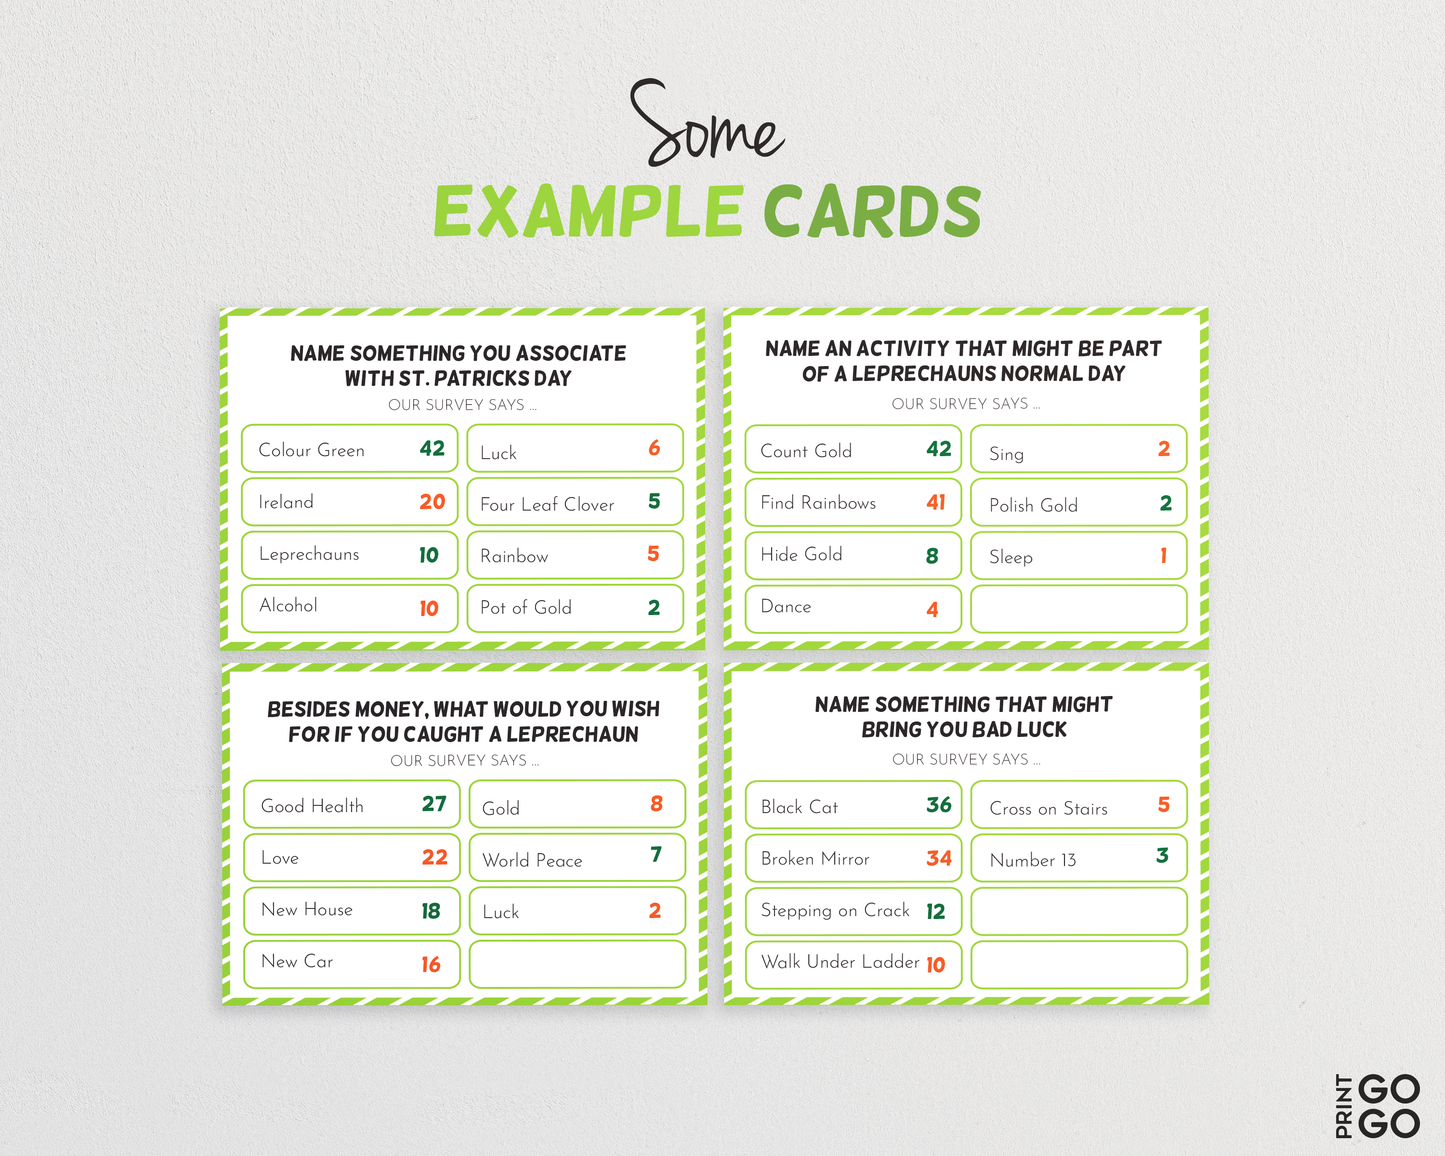 St. Patrick's Day friendly feud example cards.